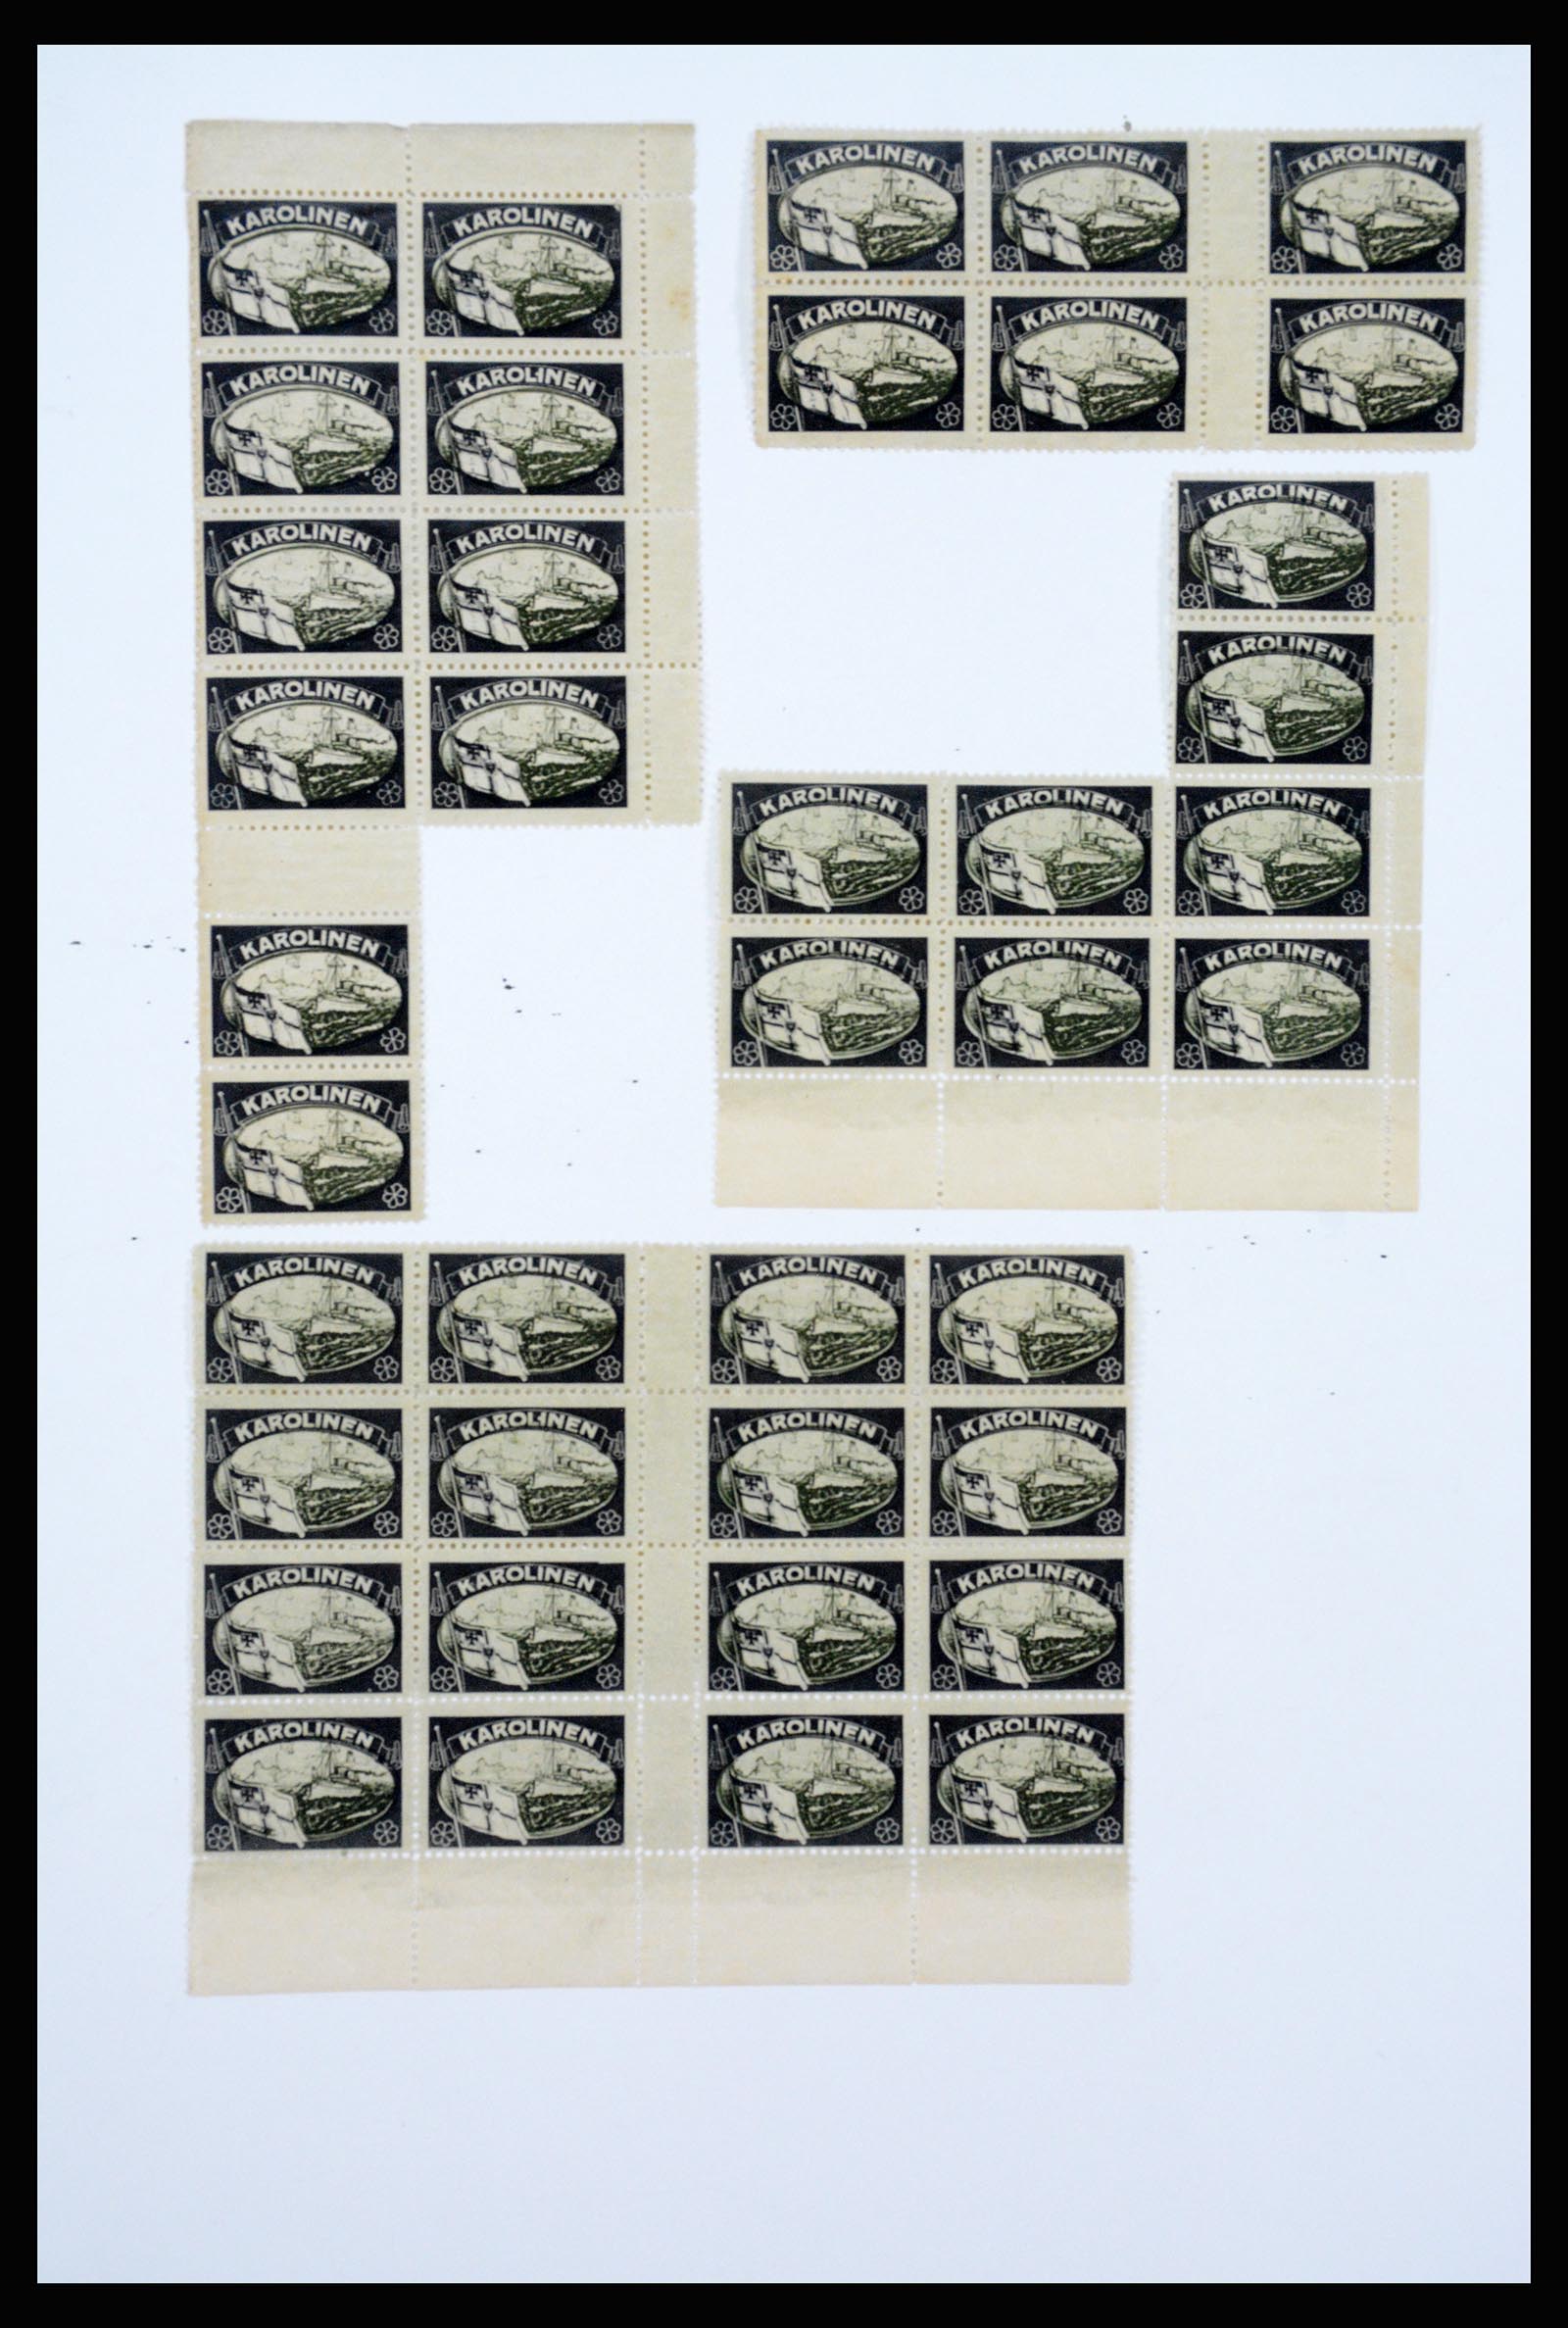 37194 014 - Stamp collection 37194 German Colonies mourning stamps.